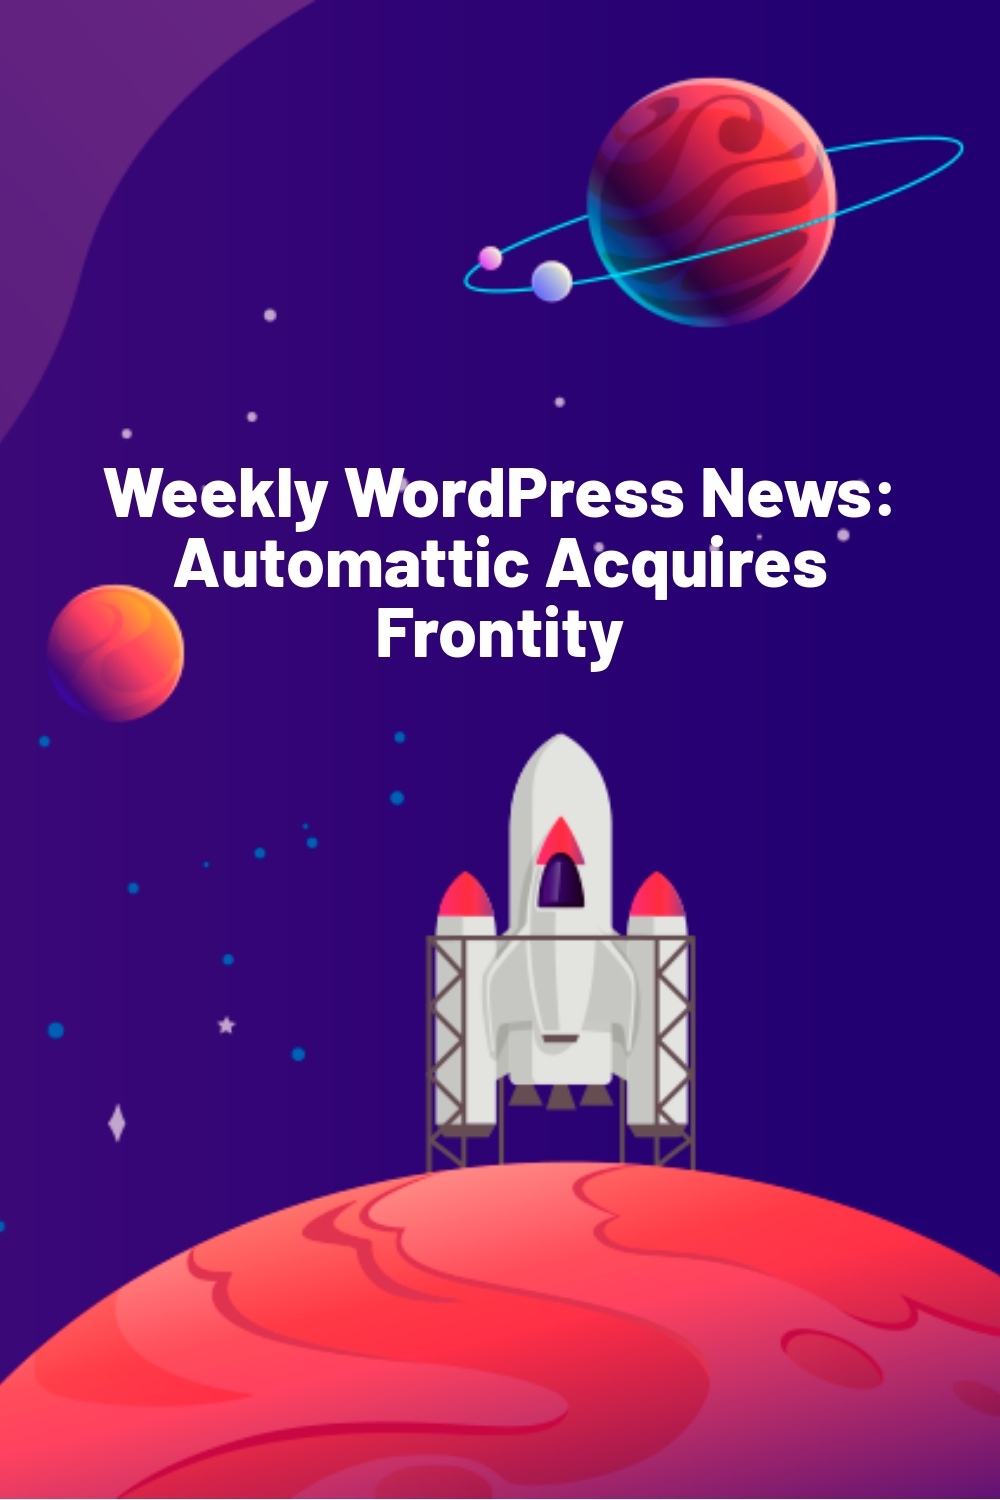 Weekly WordPress News:  Automattic Acquires Frontity